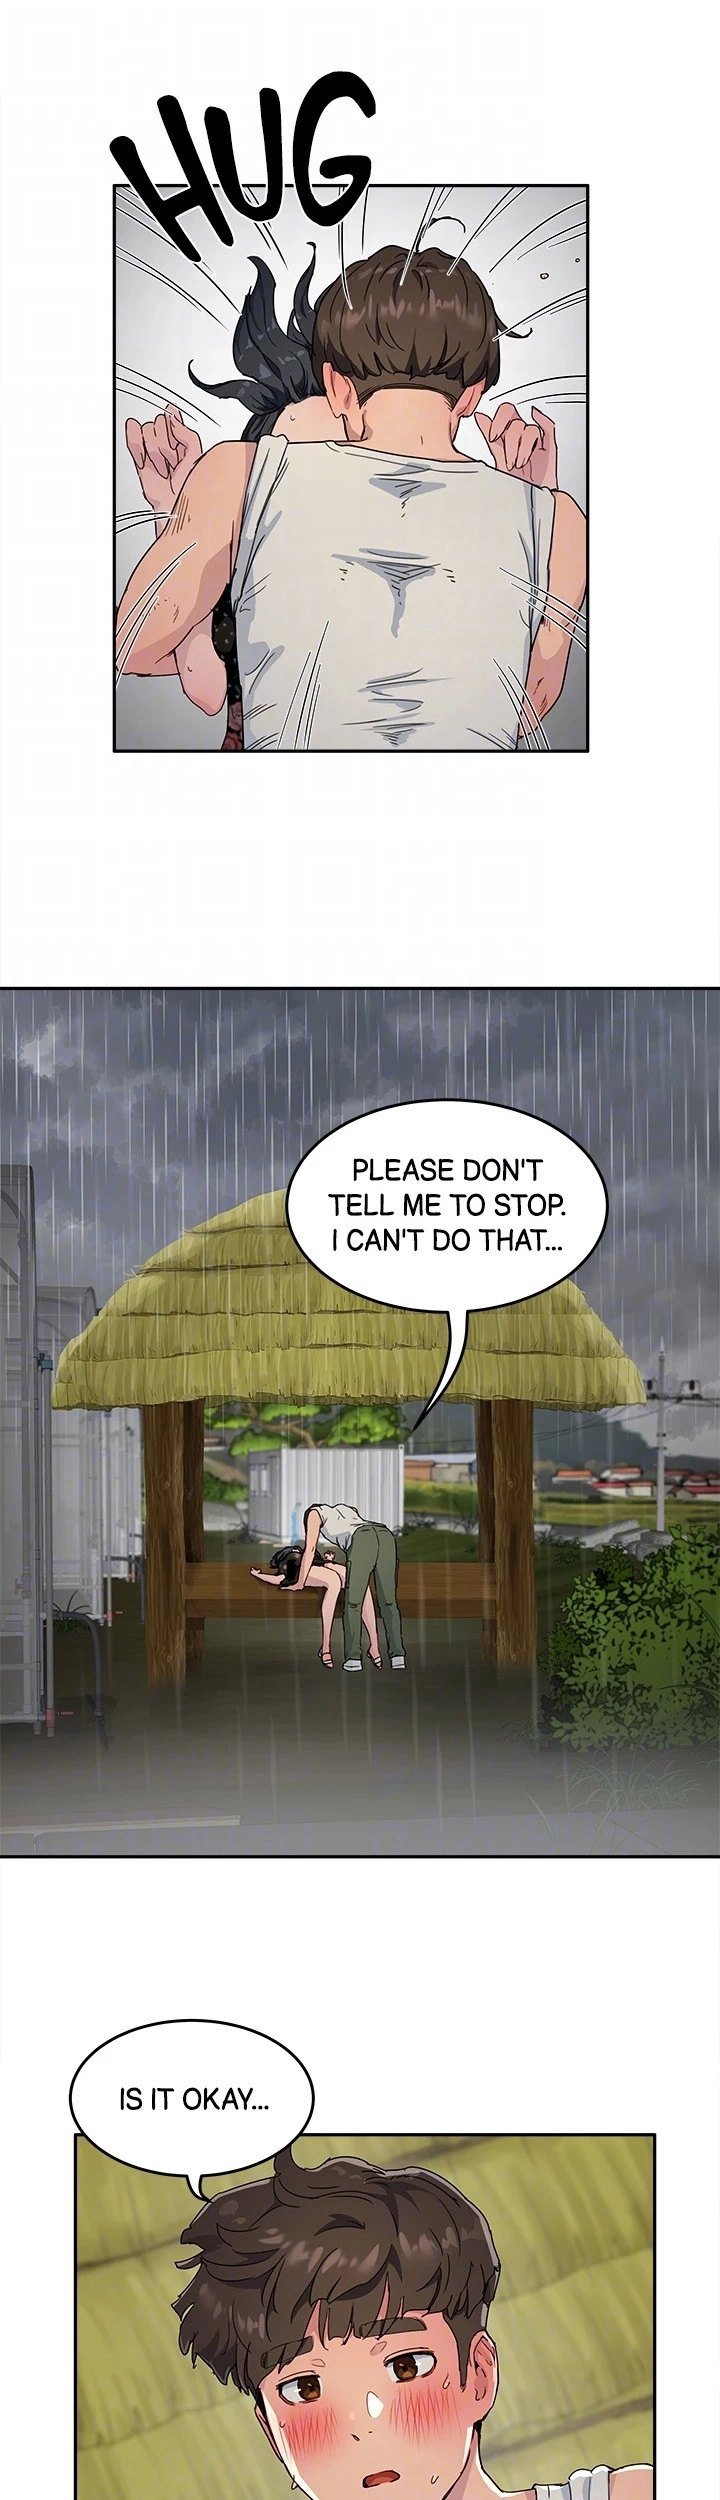 in-the-summer-chap-31-18